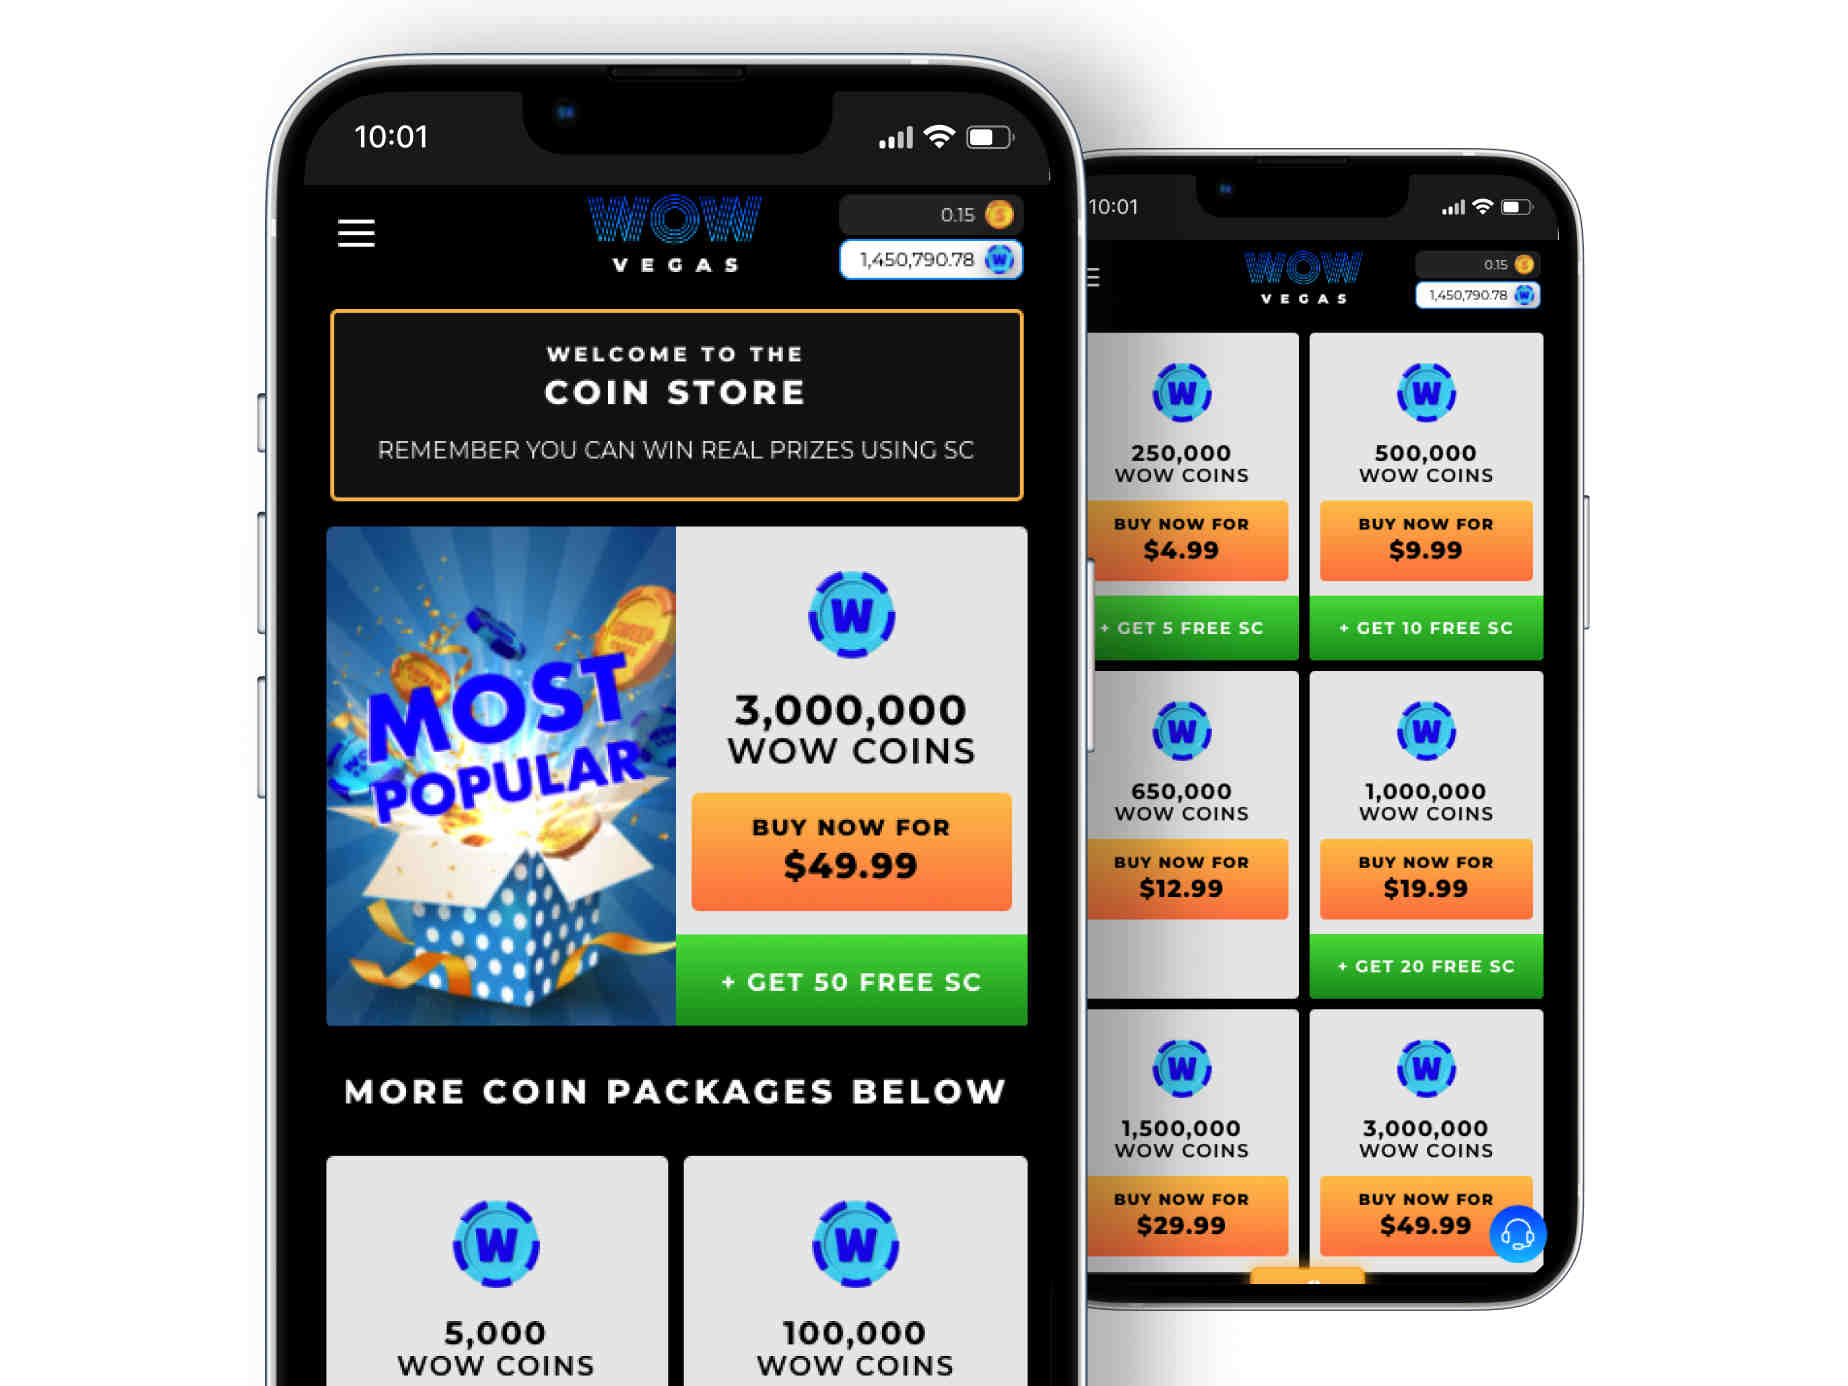 Sweepstakes casino coin packages showing pricing and perks at WOW Vegas casino on mobile device